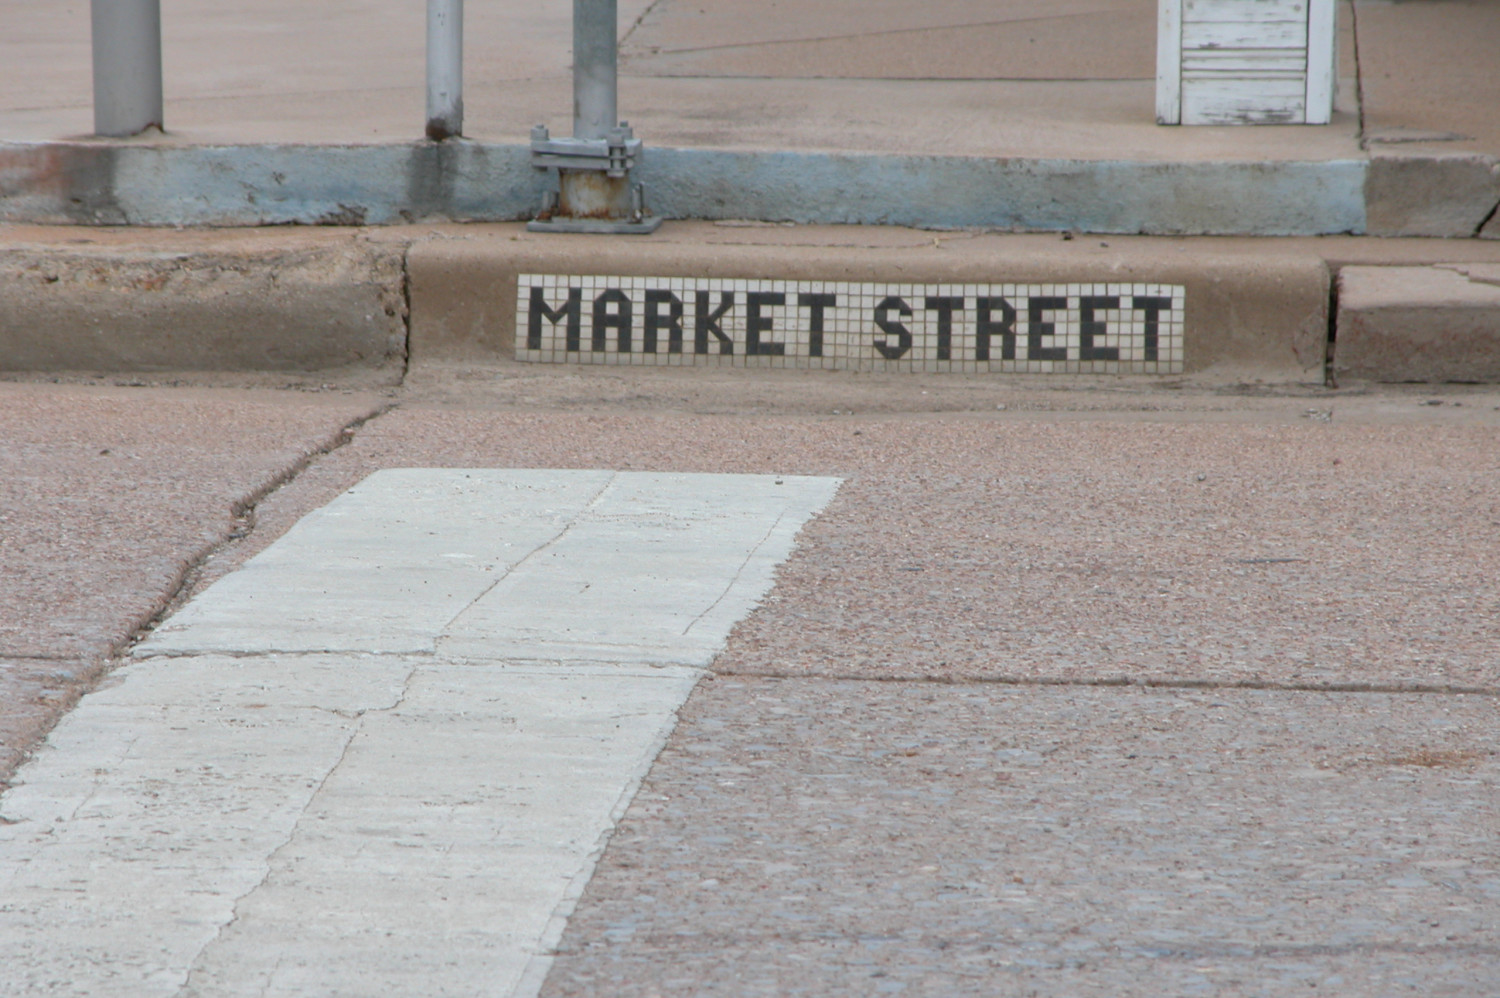 Tiled street sign in Baird "Market Street"
                                                
                                                    [Sequence #]: 1 of 1
                                                